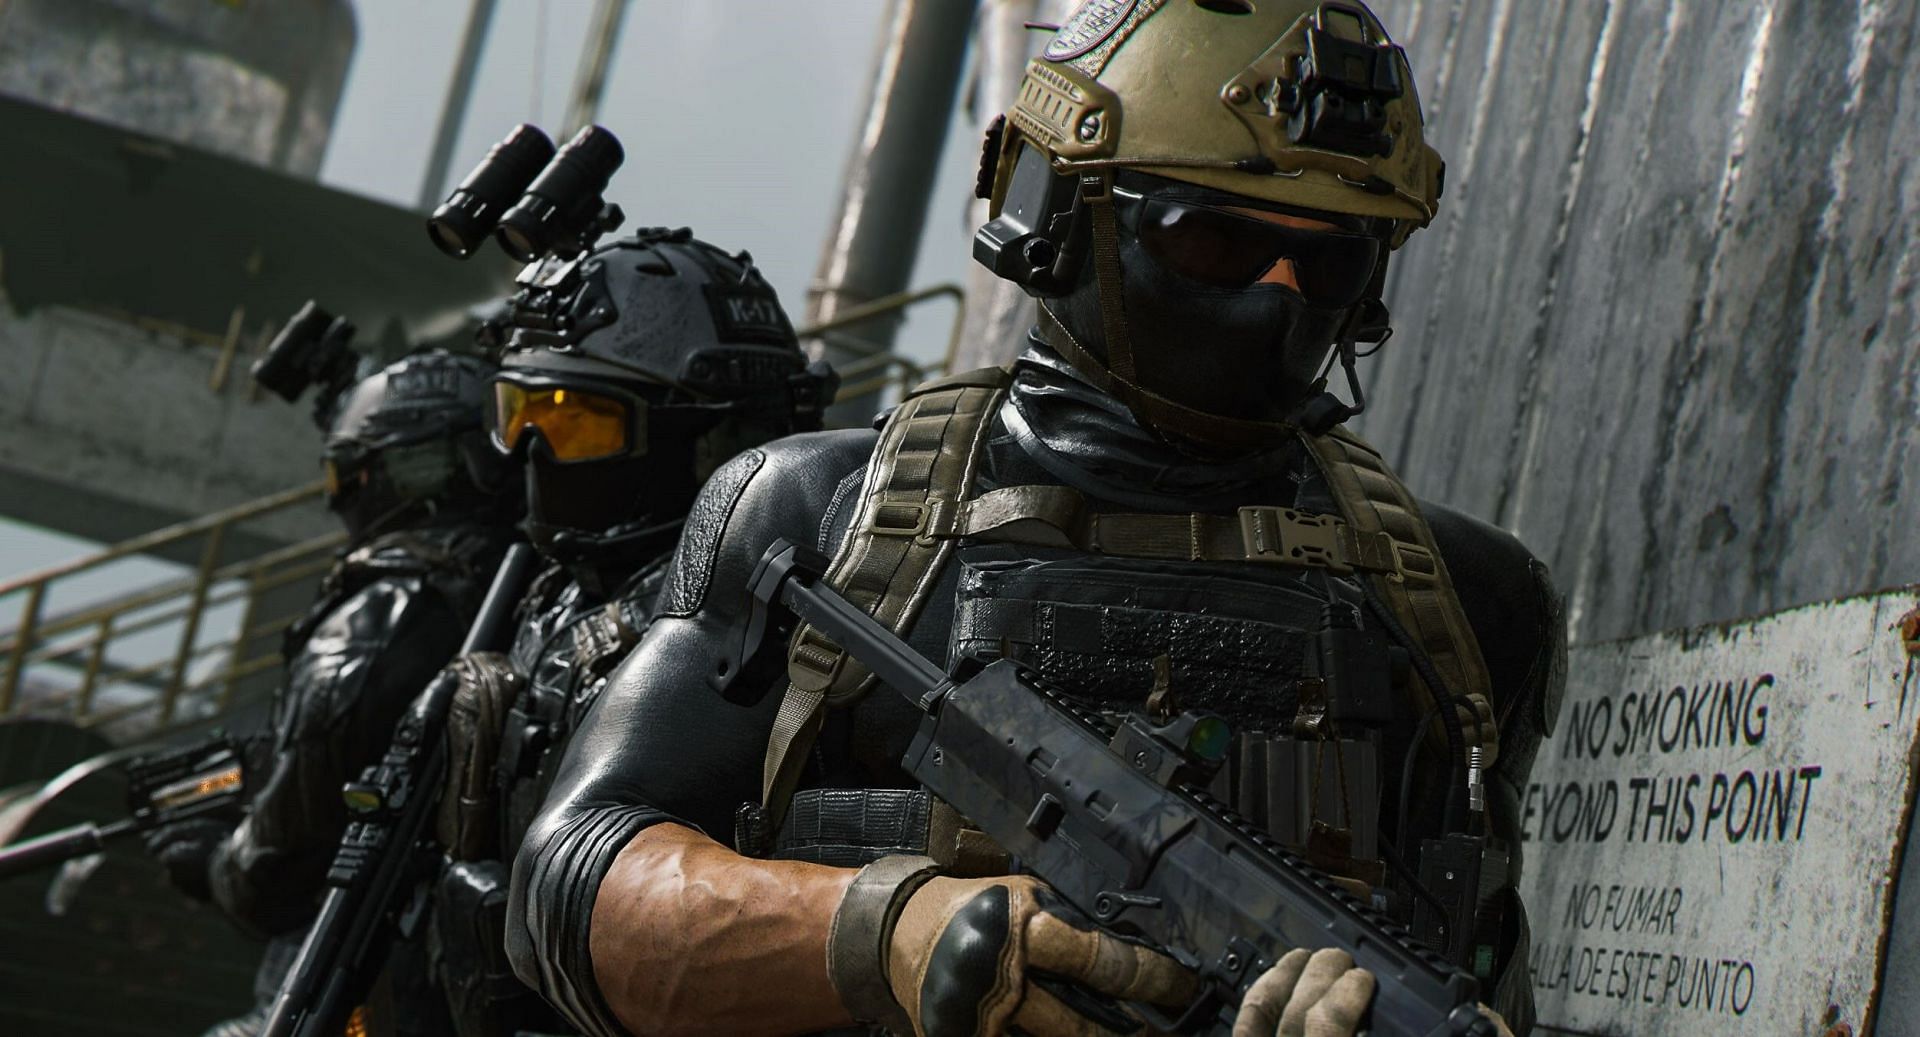 The upcoming Call of Duty game is packed with content (Image via Activision)